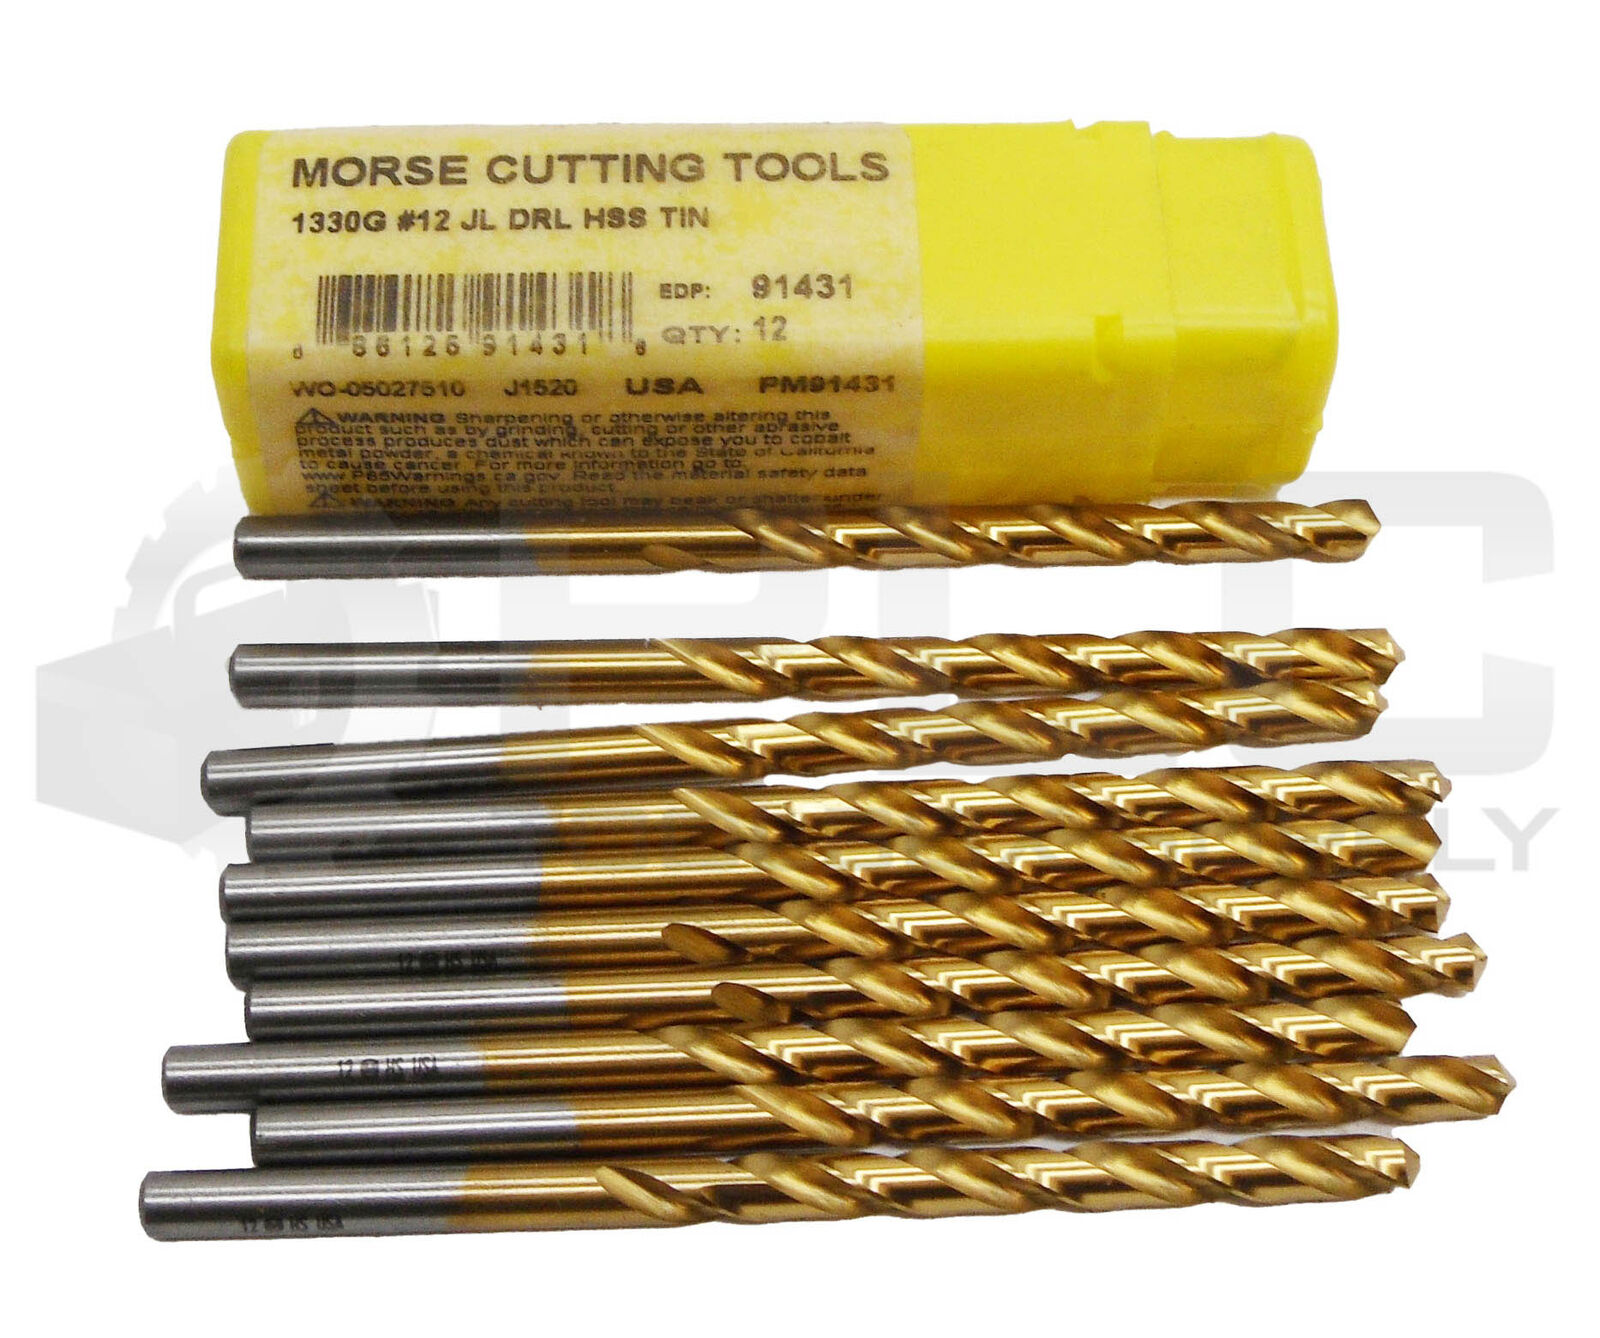 NEW PACK OF 10 MORSE CUTTING TOOLS 91431 #12 JOBBER LENGTH DRILL 1330G